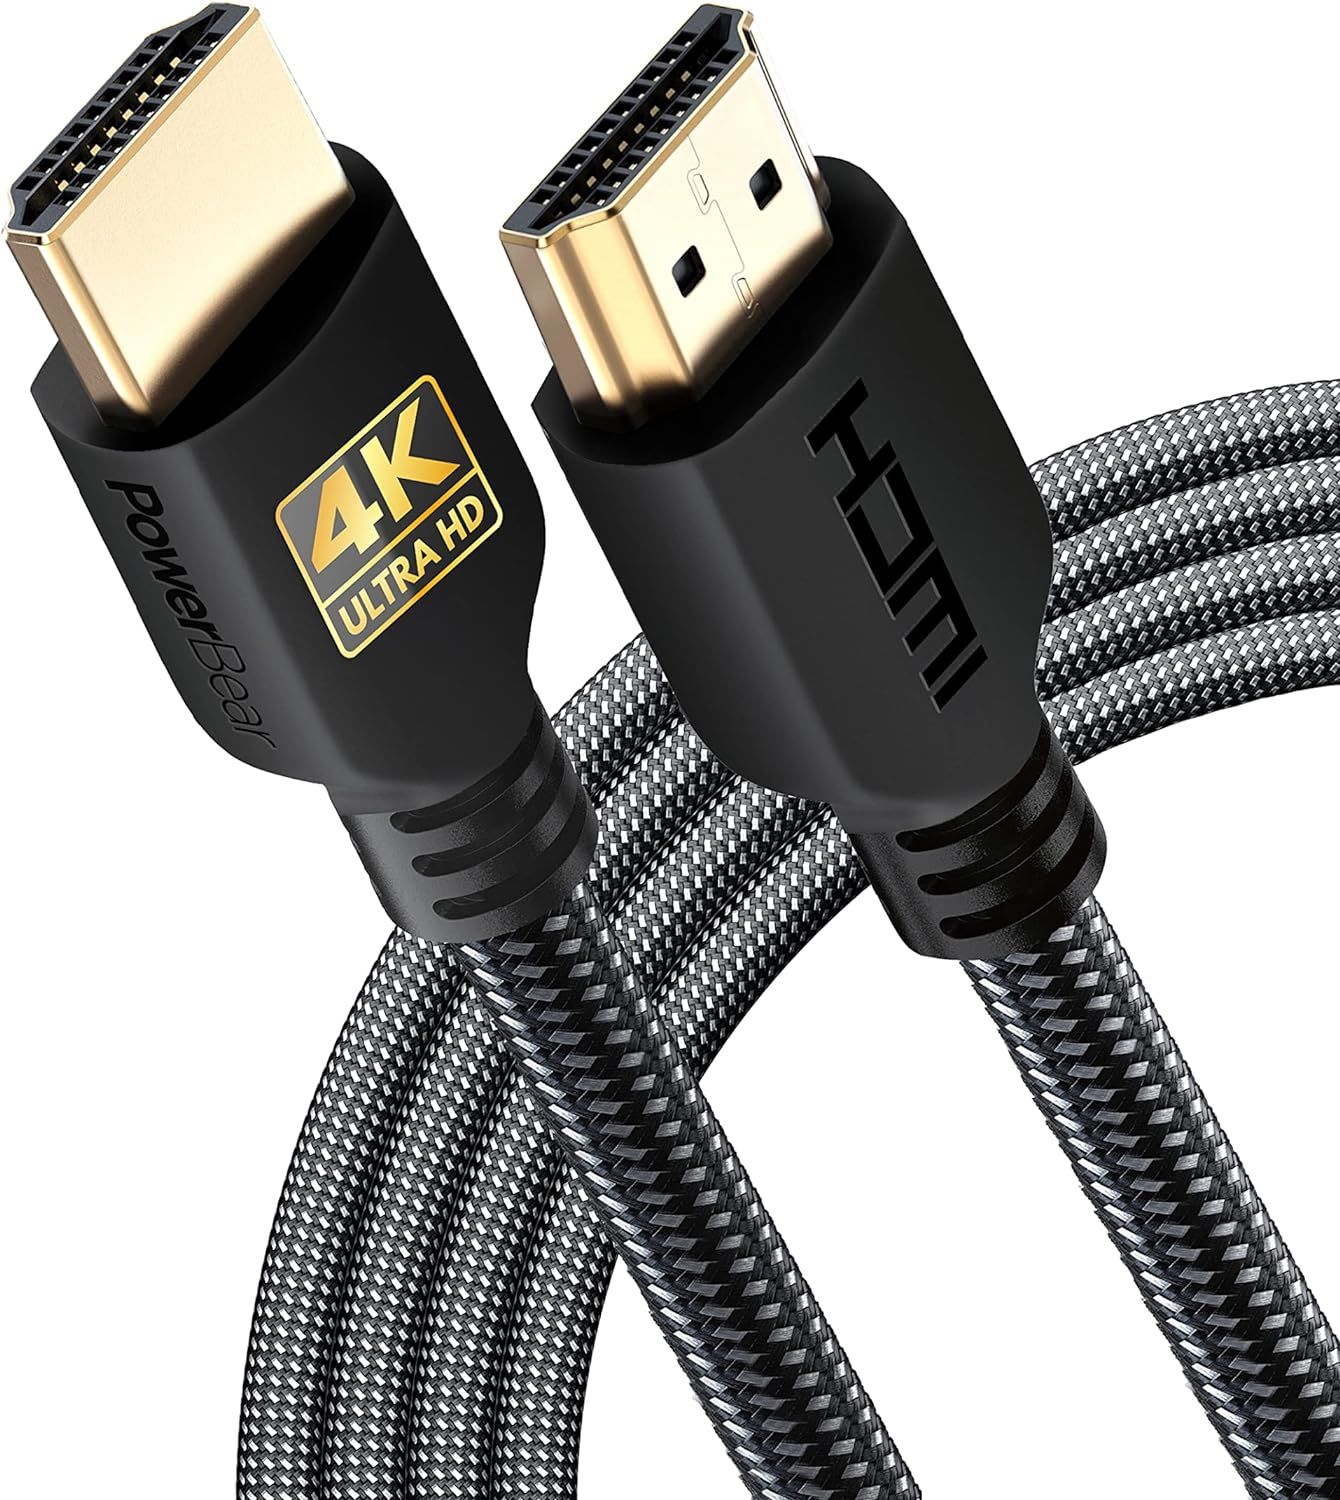 Best HDMI Cables in 2024 - CNET